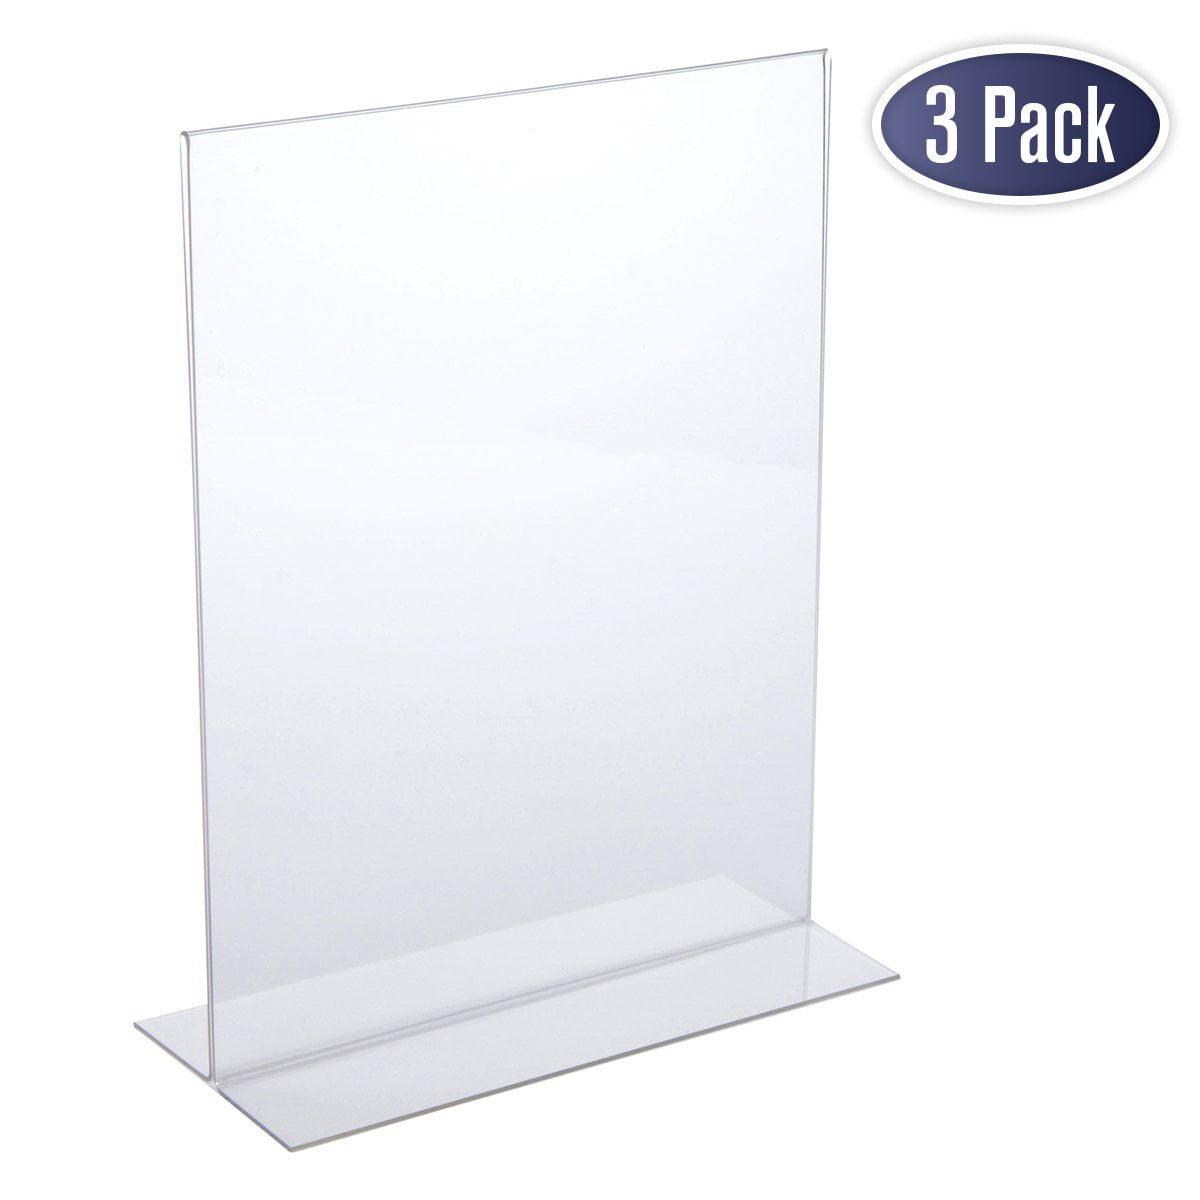 Pack of 3 Acrylic 2-Sided Restaurant Menu Holder Table Stand 8x10 LHM-810 Clear-Ad 2-Panel Photo Display Frame & Sign Holder 